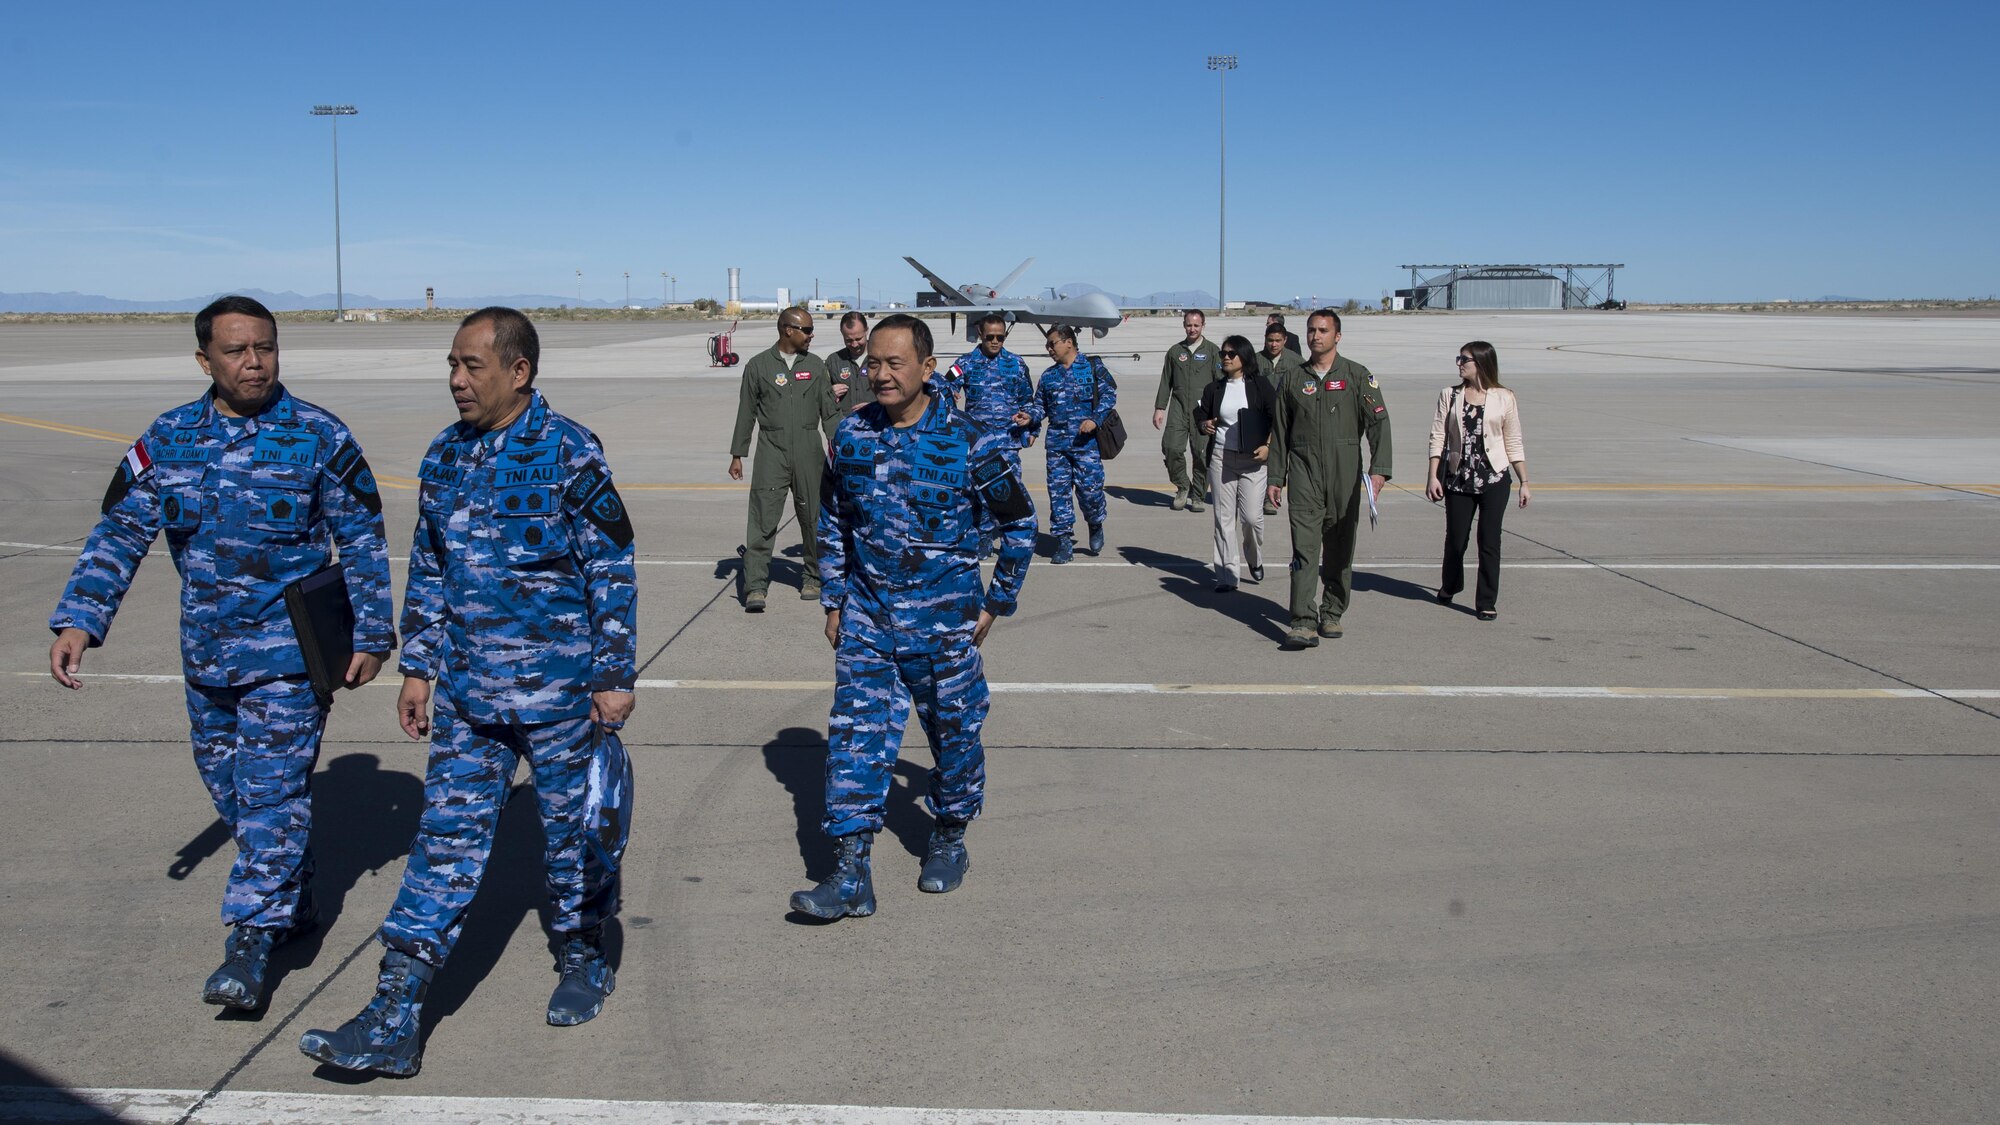 Members of the Indonesian Air Force exit the MQ-9 Training Unit’s flight line following a distinguished visitor tour at Holloman Air Force Base, N.M. on March 15, 2017. IDAF delegation members were bussed to the 16th Training Squadron, where delegation members were able to handle an RPA flight simulator, and learn more about Holloman’s RPA training units. (U.S. Air Force photo by Airman 1st Class Alexis P. Docherty)